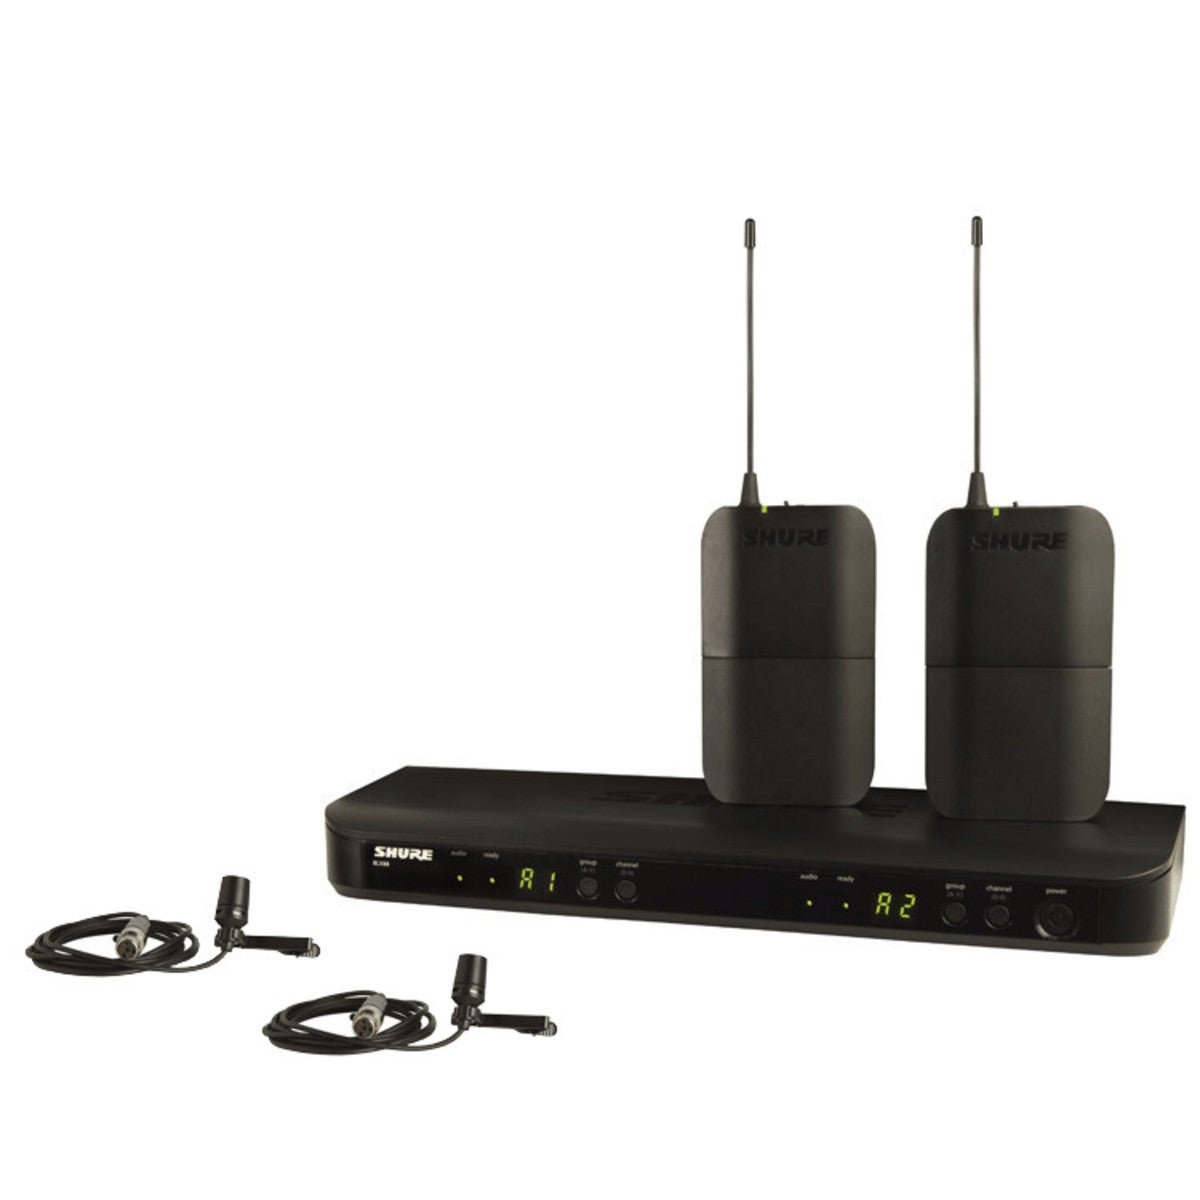 Shure BLX188UK-CVL Shure Wireless Dual Bodypack System for Guitarists with CVL-B/C Lavalier Mics